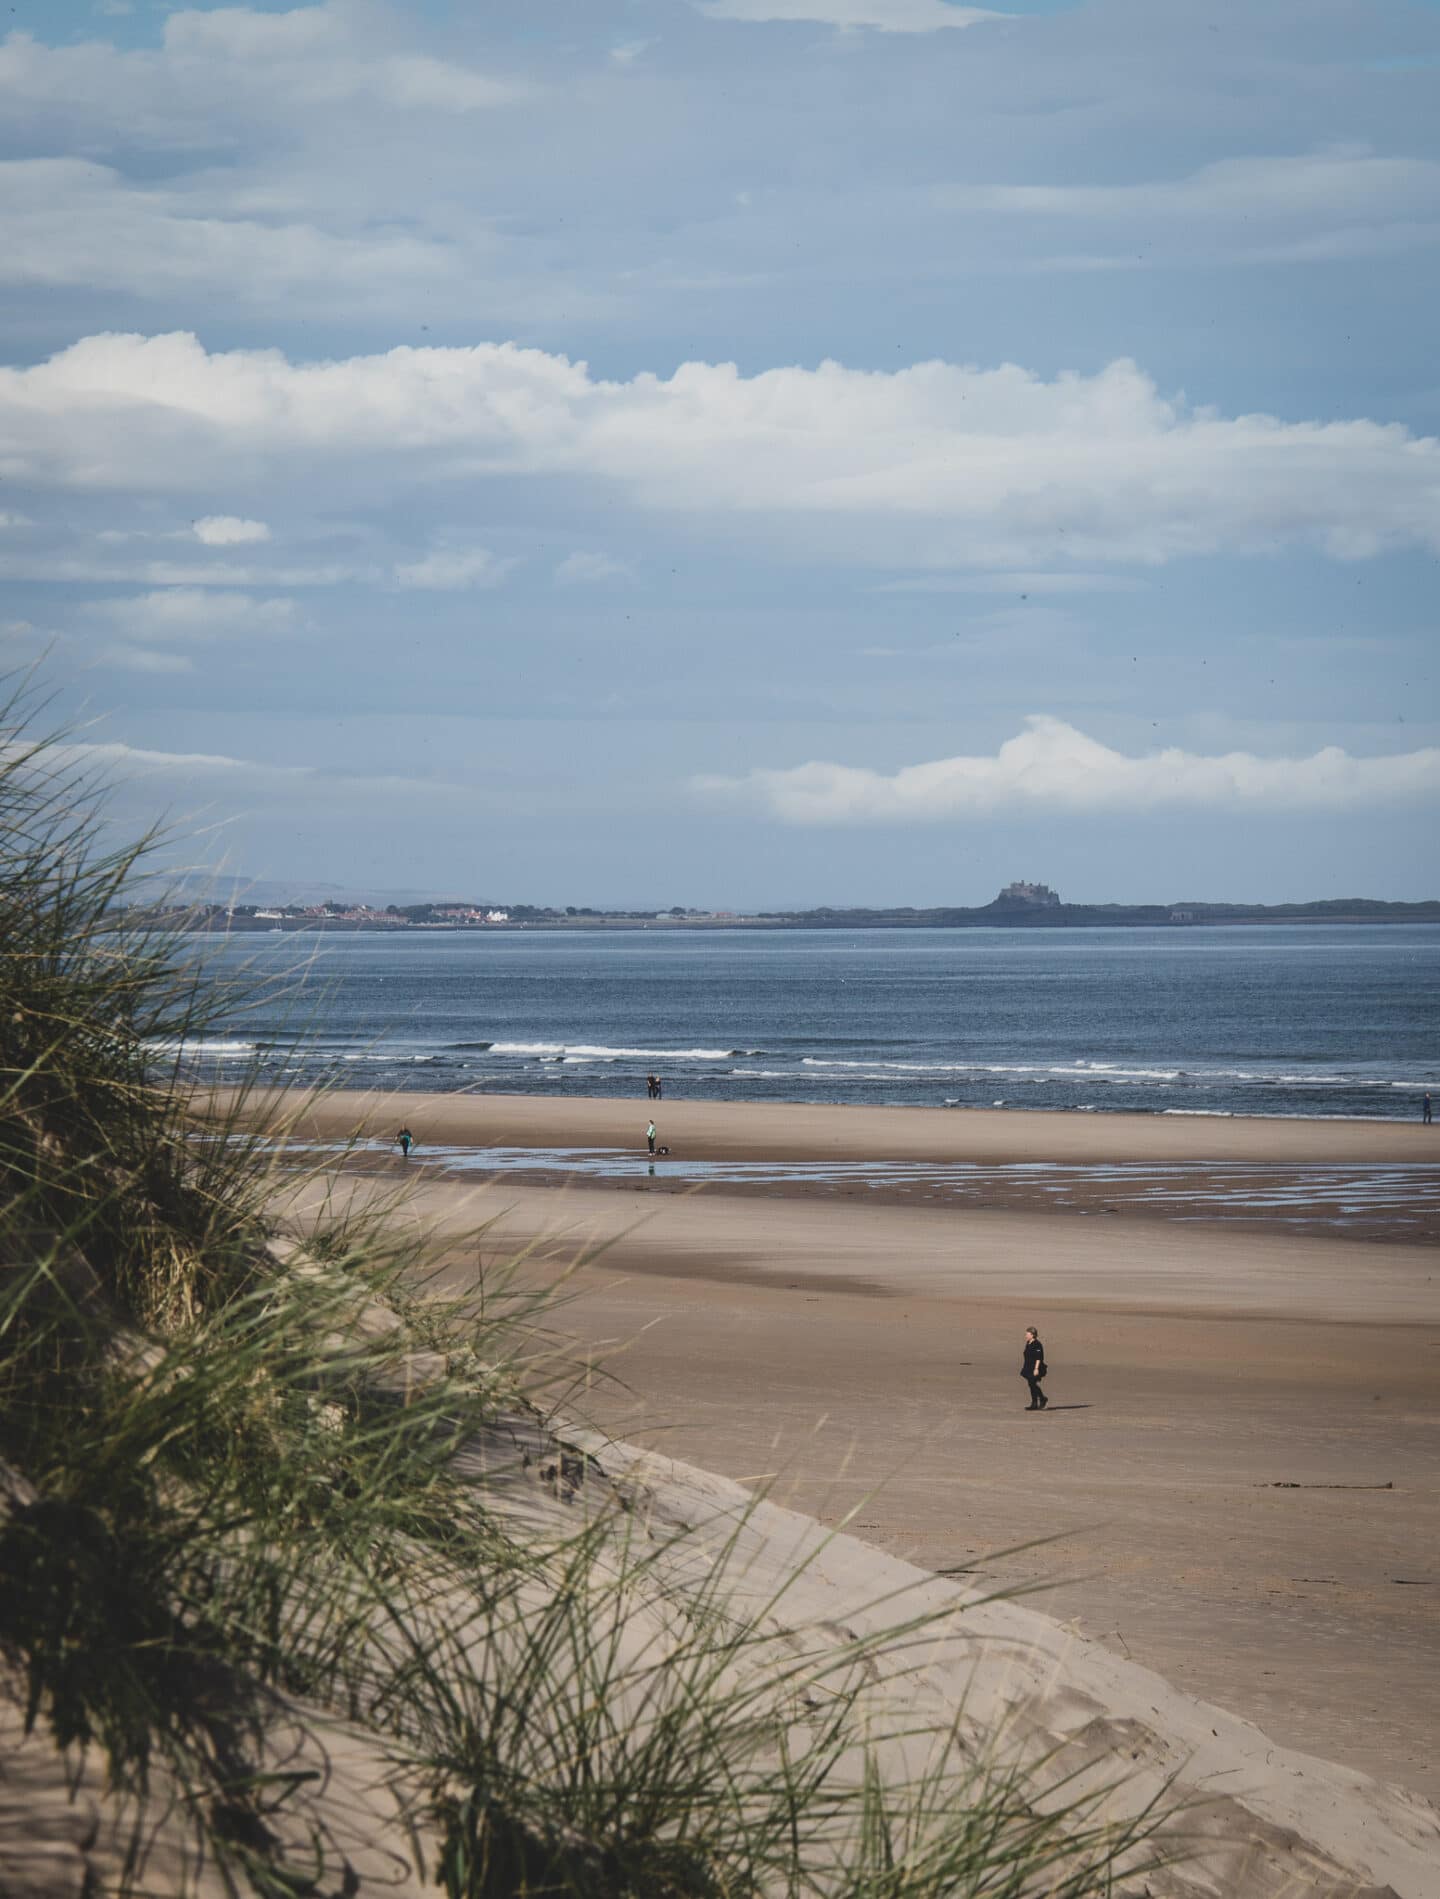 A view over bamburgh beach. Grass covered sand dunes in the foreground. Lindisfarne Castle is visible on the horizon. A number of people are strolling along the beach. You can also get great views of the Farne Islands from this beach.